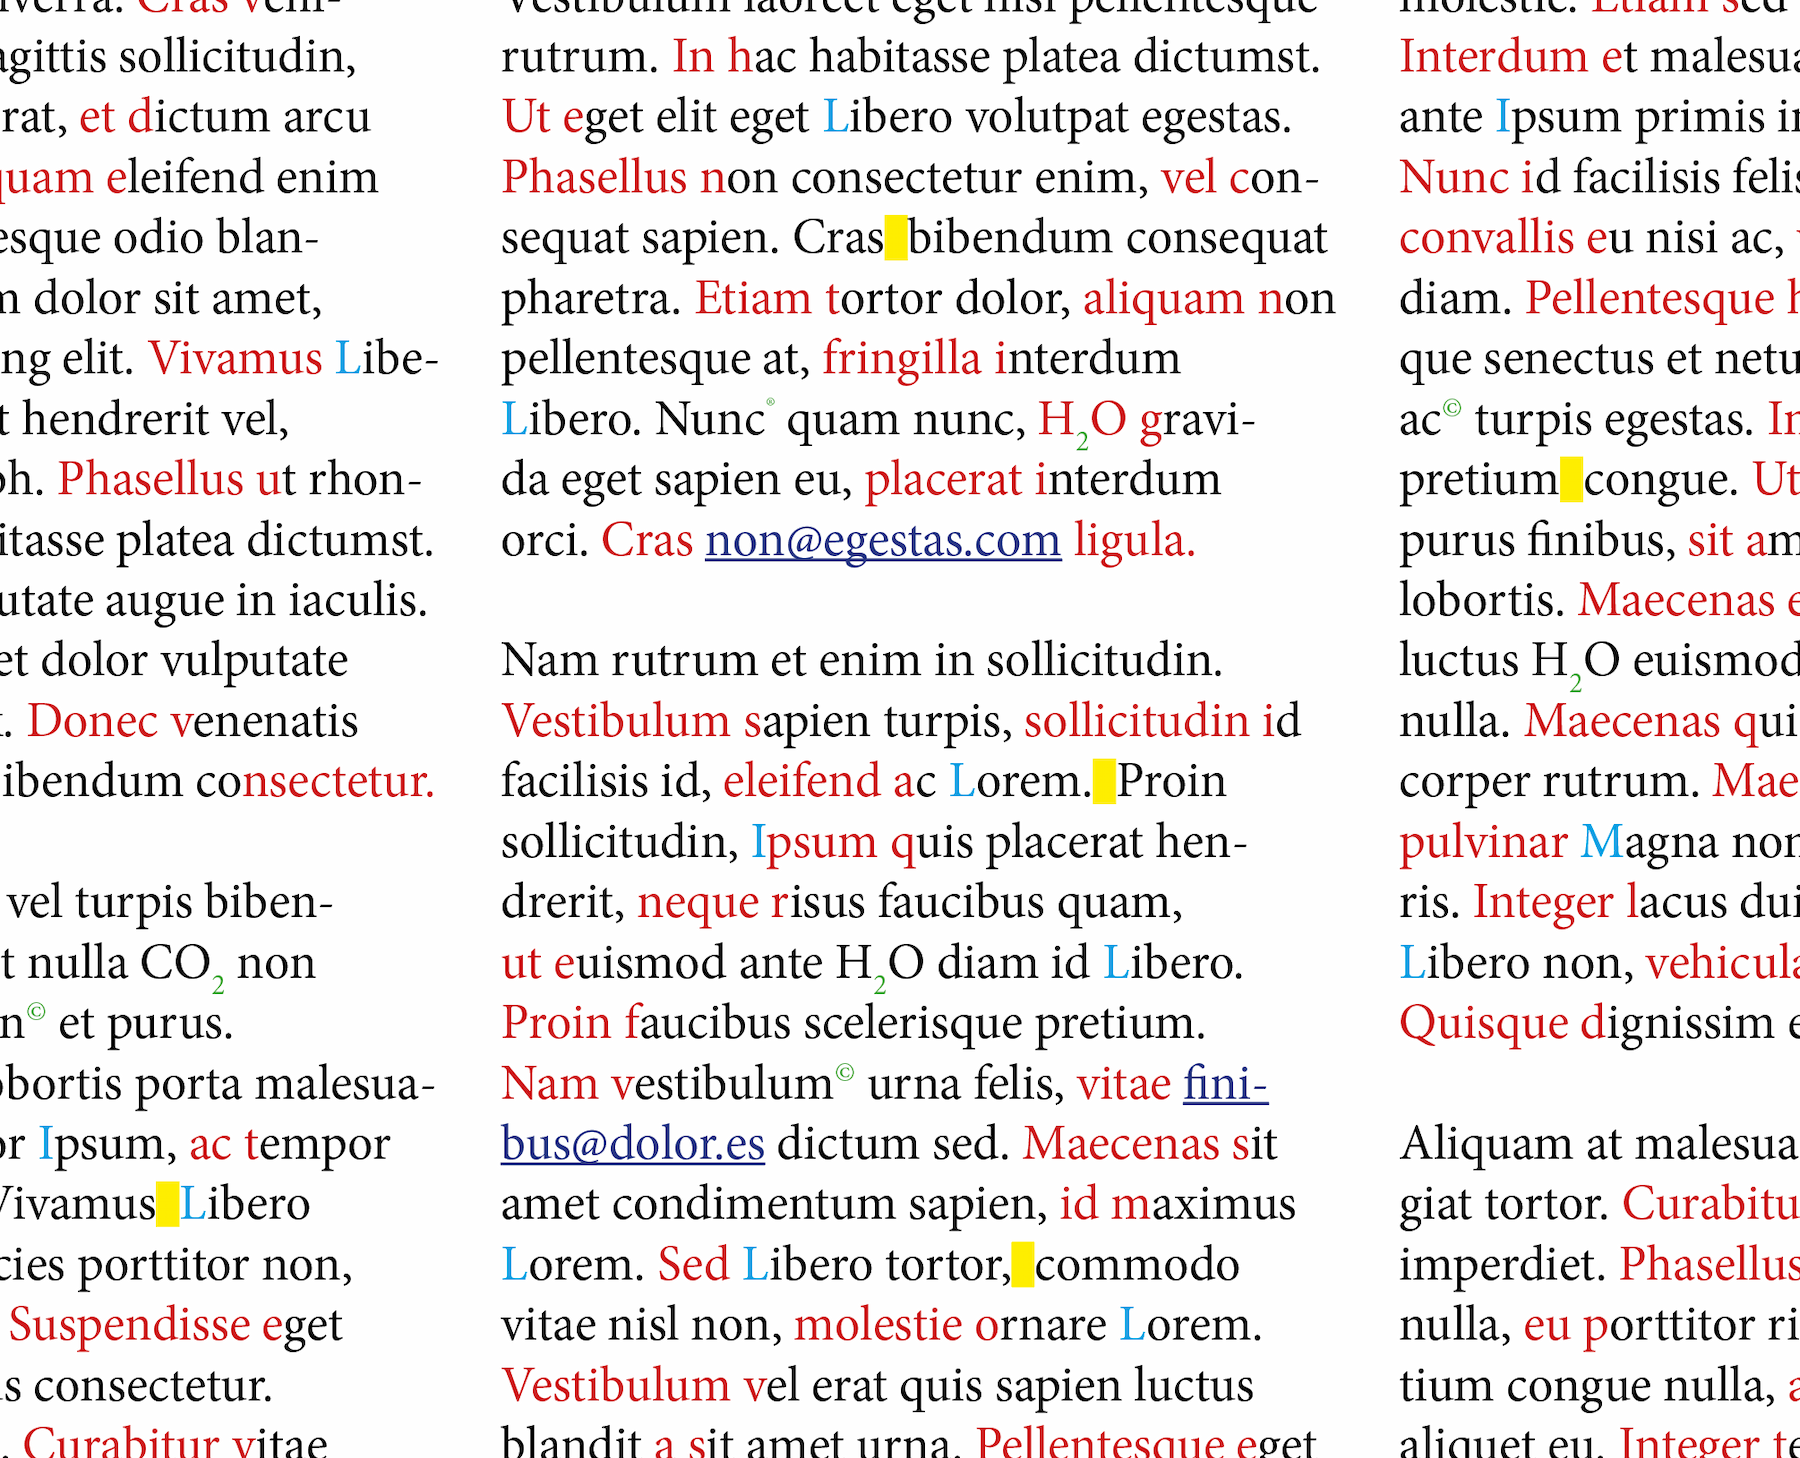 GREP paragraph styles on InDesign